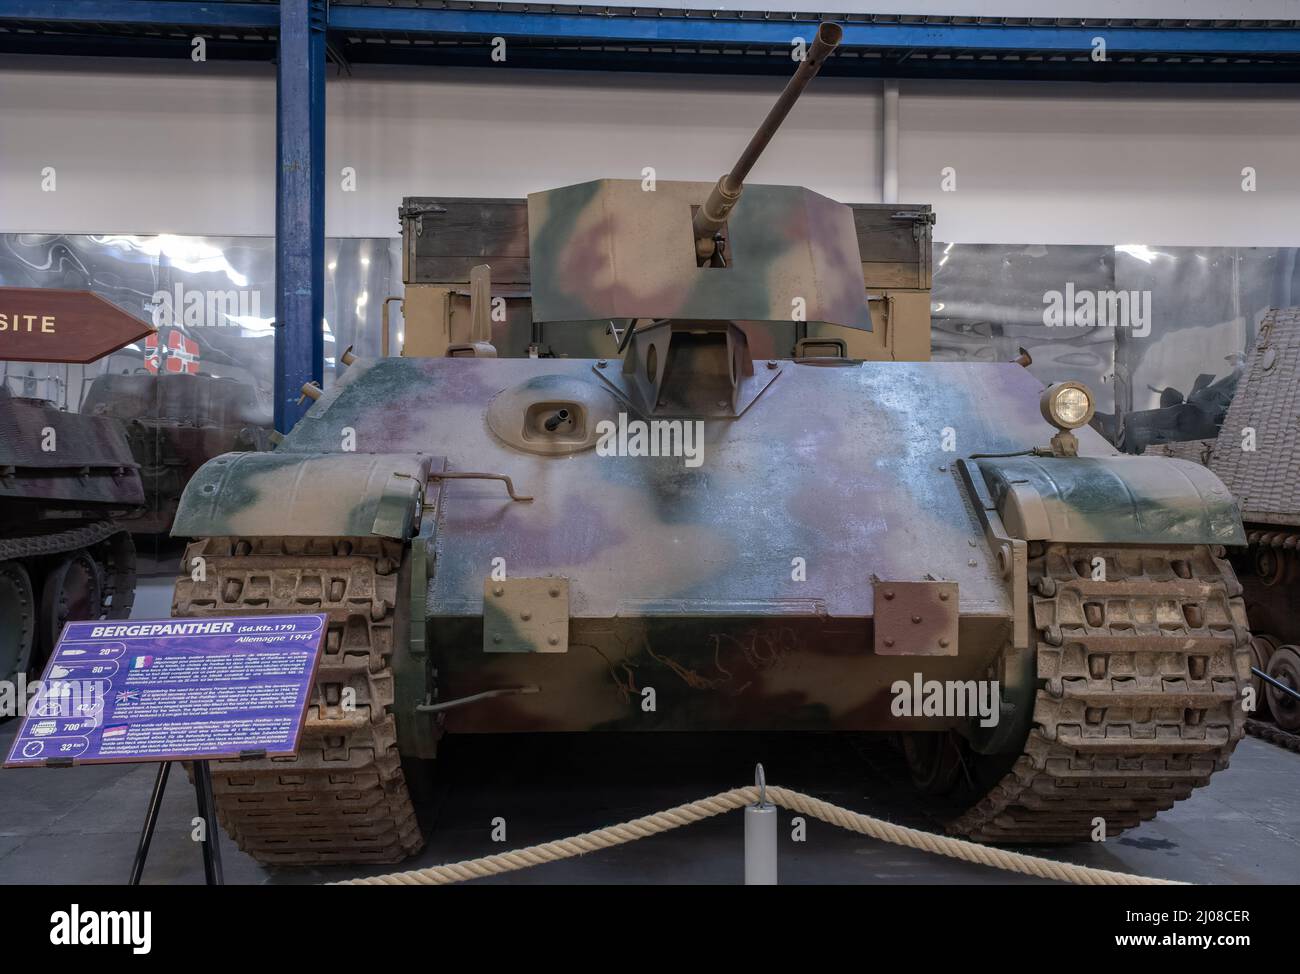 Saumur, France - February 26, 2022:  German Bergepanther (Sd. Kfz. 179). Tank museum in Saumur (Musee des Blindes). Second world war exhibition. Selec Stock Photo